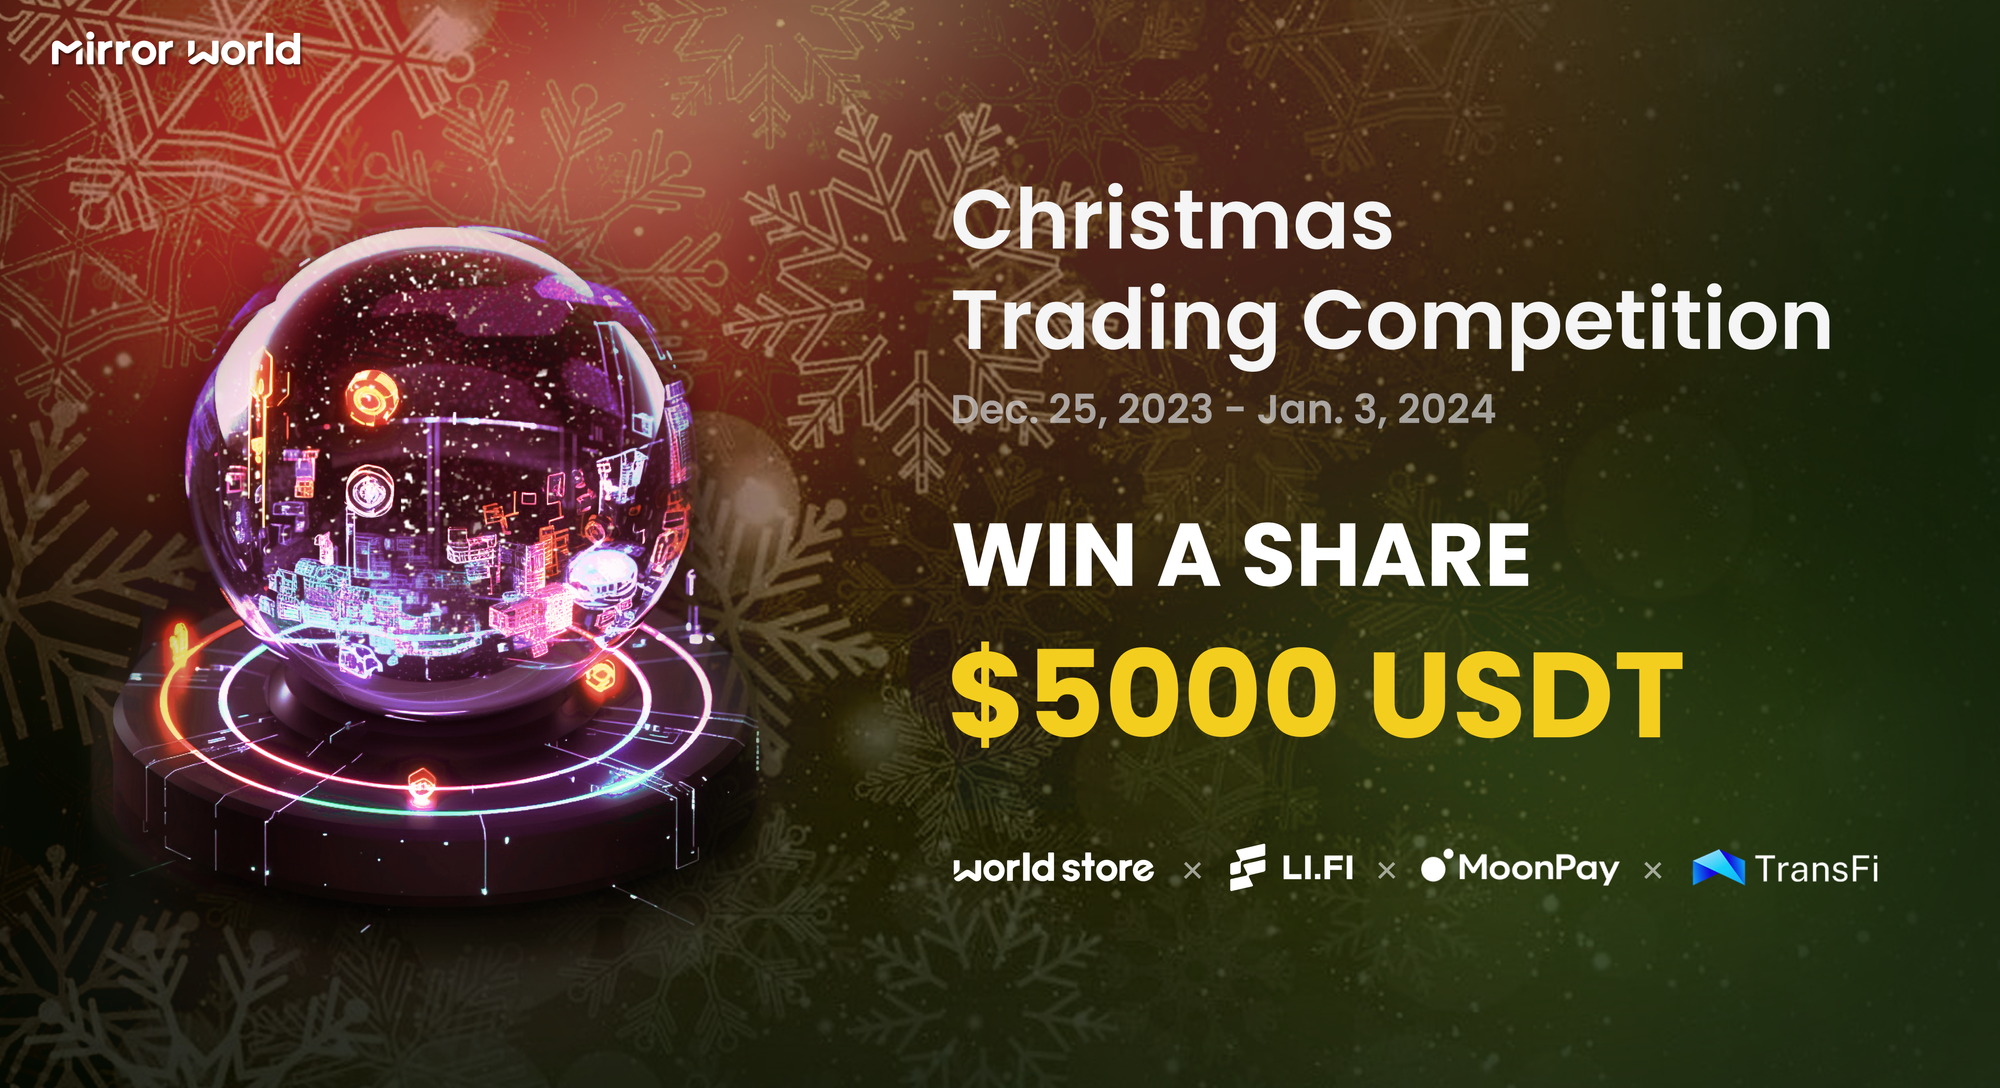 World Store Christmas Trading Competition ðŸ””